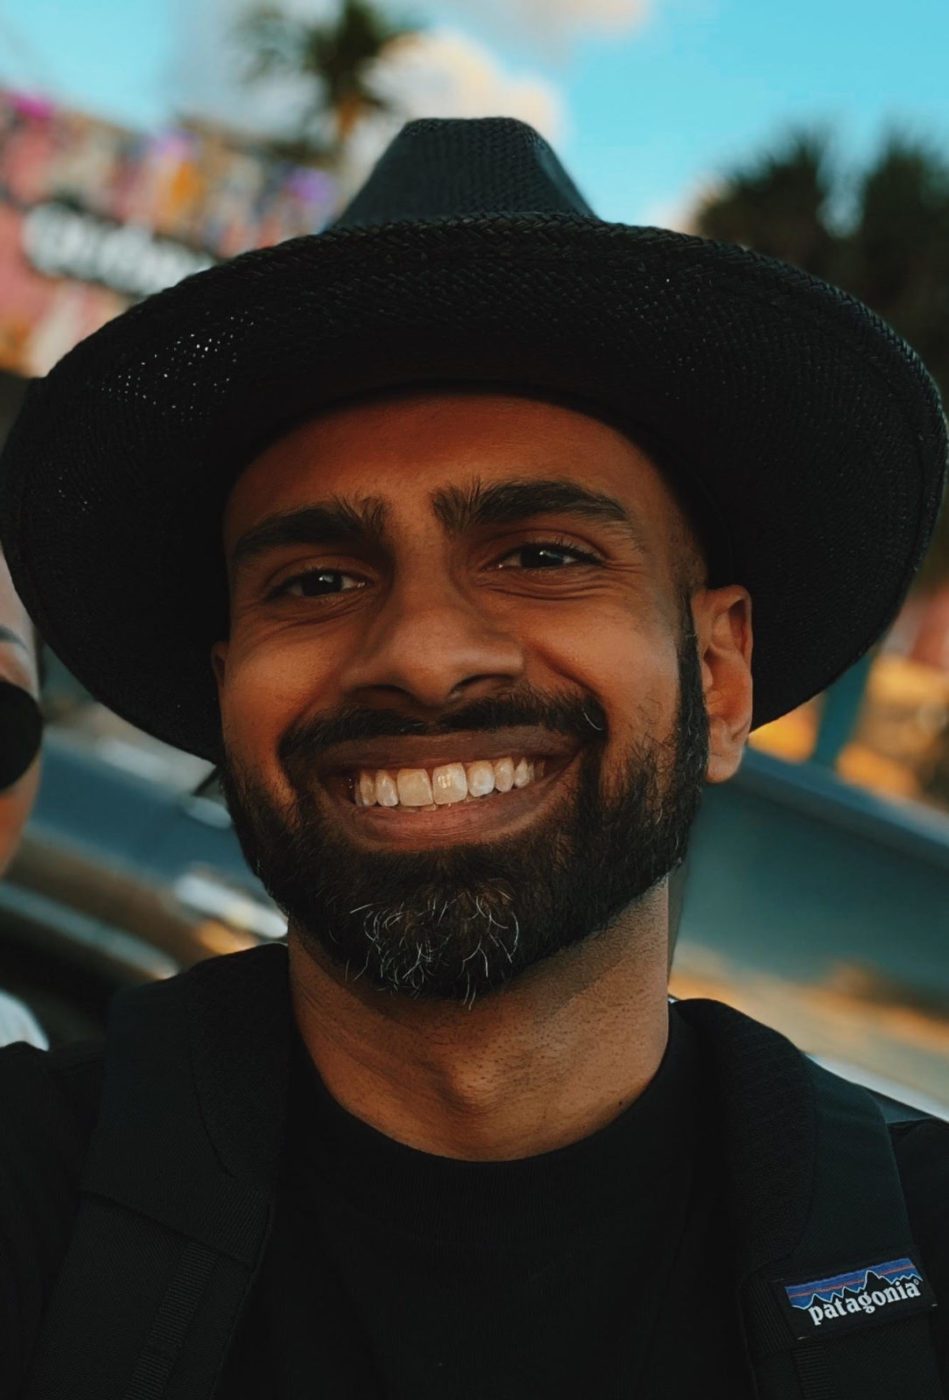 person smiling and wearing a hat